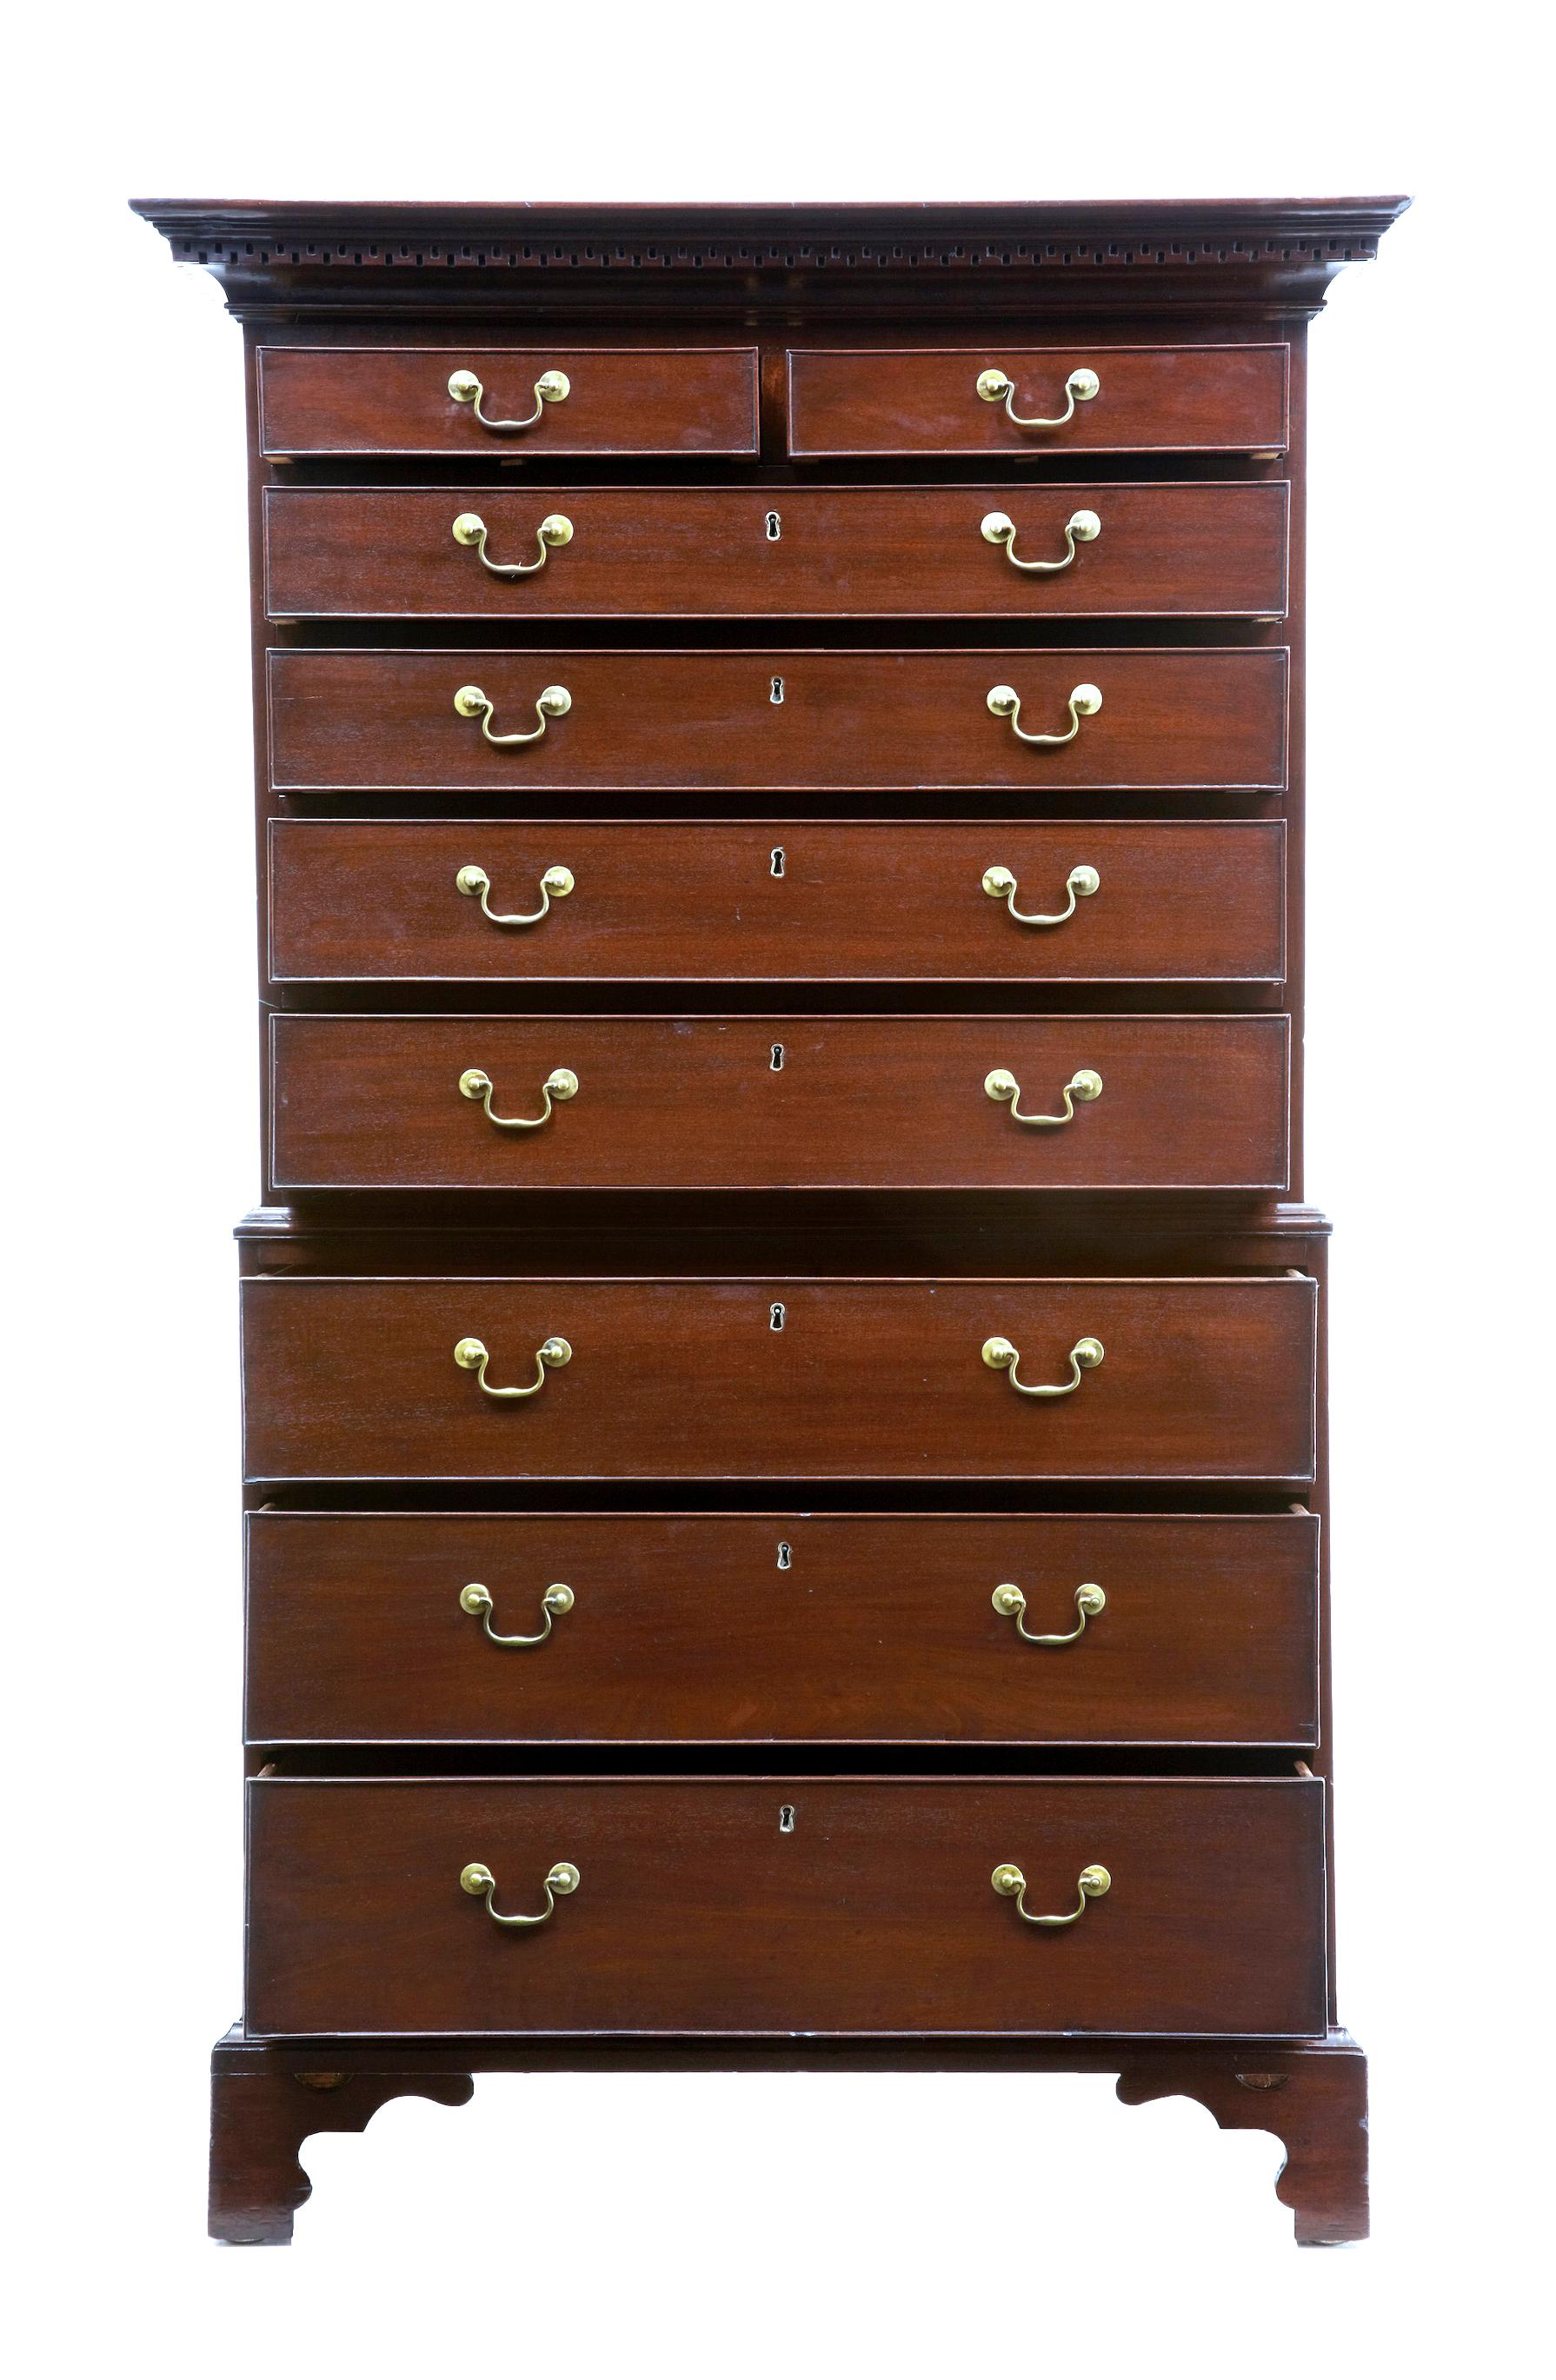 18th century Georgian mahogany chest on chest circa 1790.

Comprising of 2 sections. Elegant cornice with dentil Greek key decoration. 2 over 4 drawers to the top section with secret locks to the top drawers. 3 graduating drawers to the base. Each